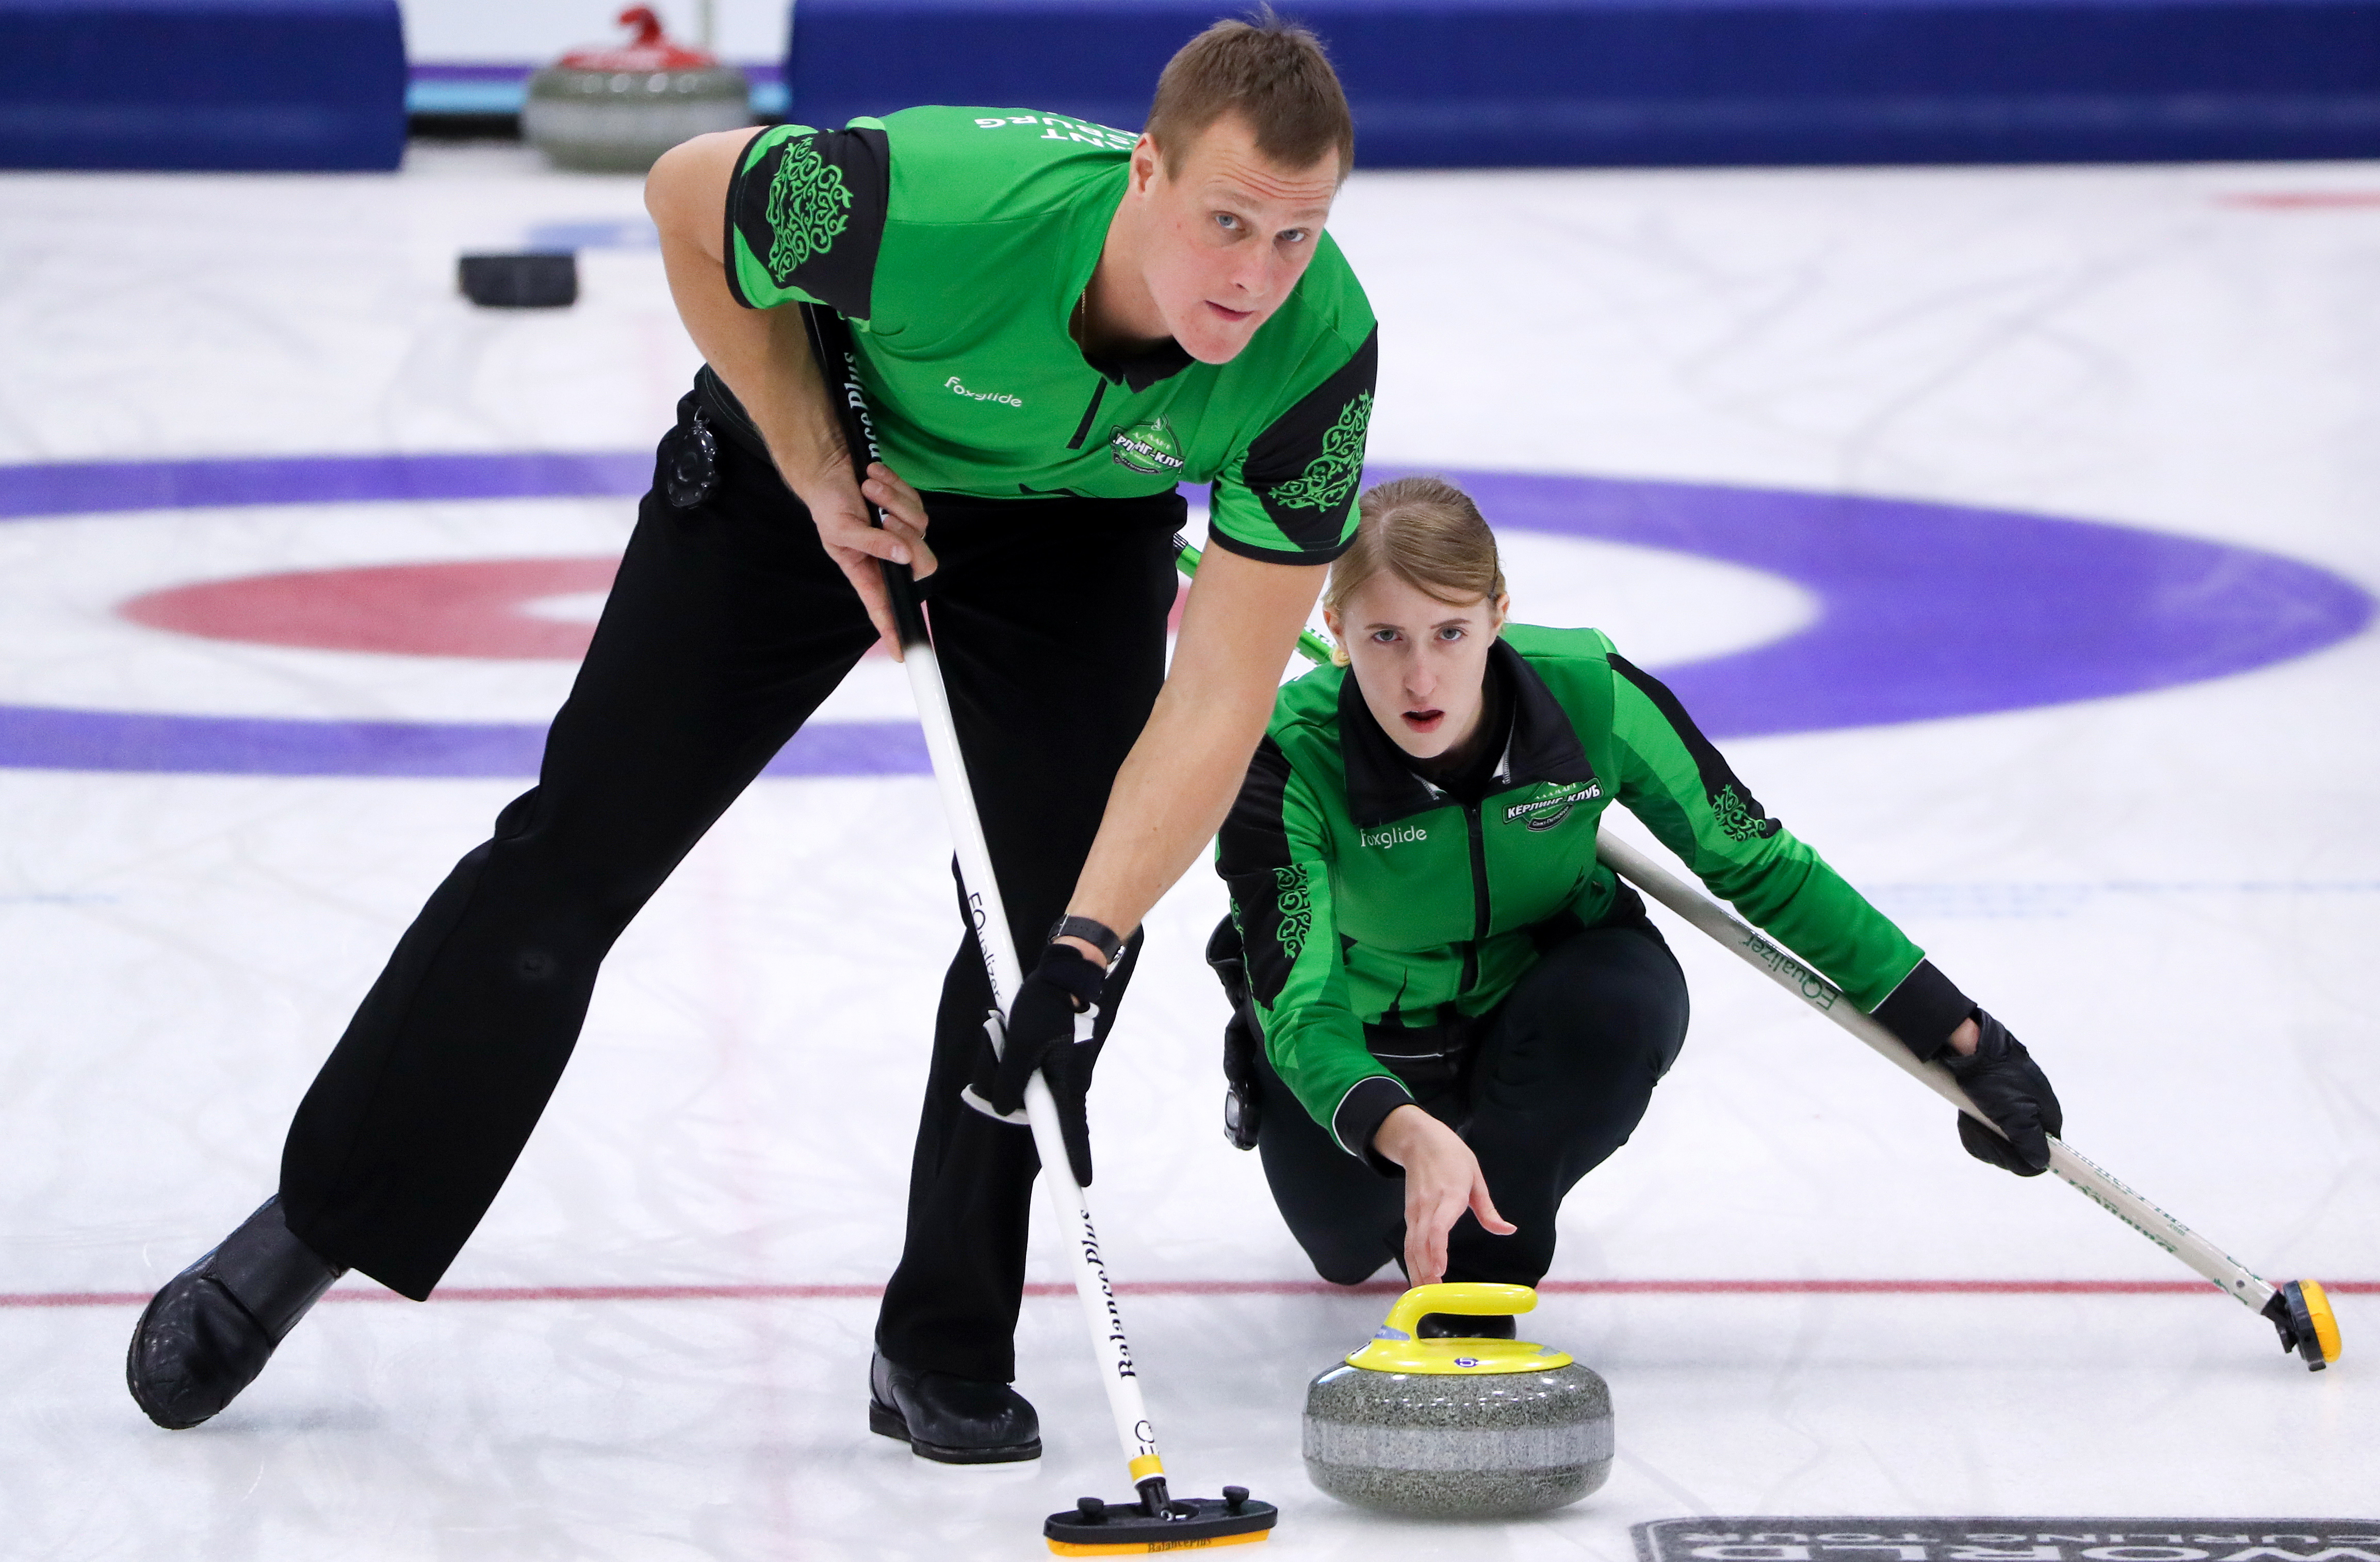 Olympics live stream Watch mixed doubles curling round robin #7 online